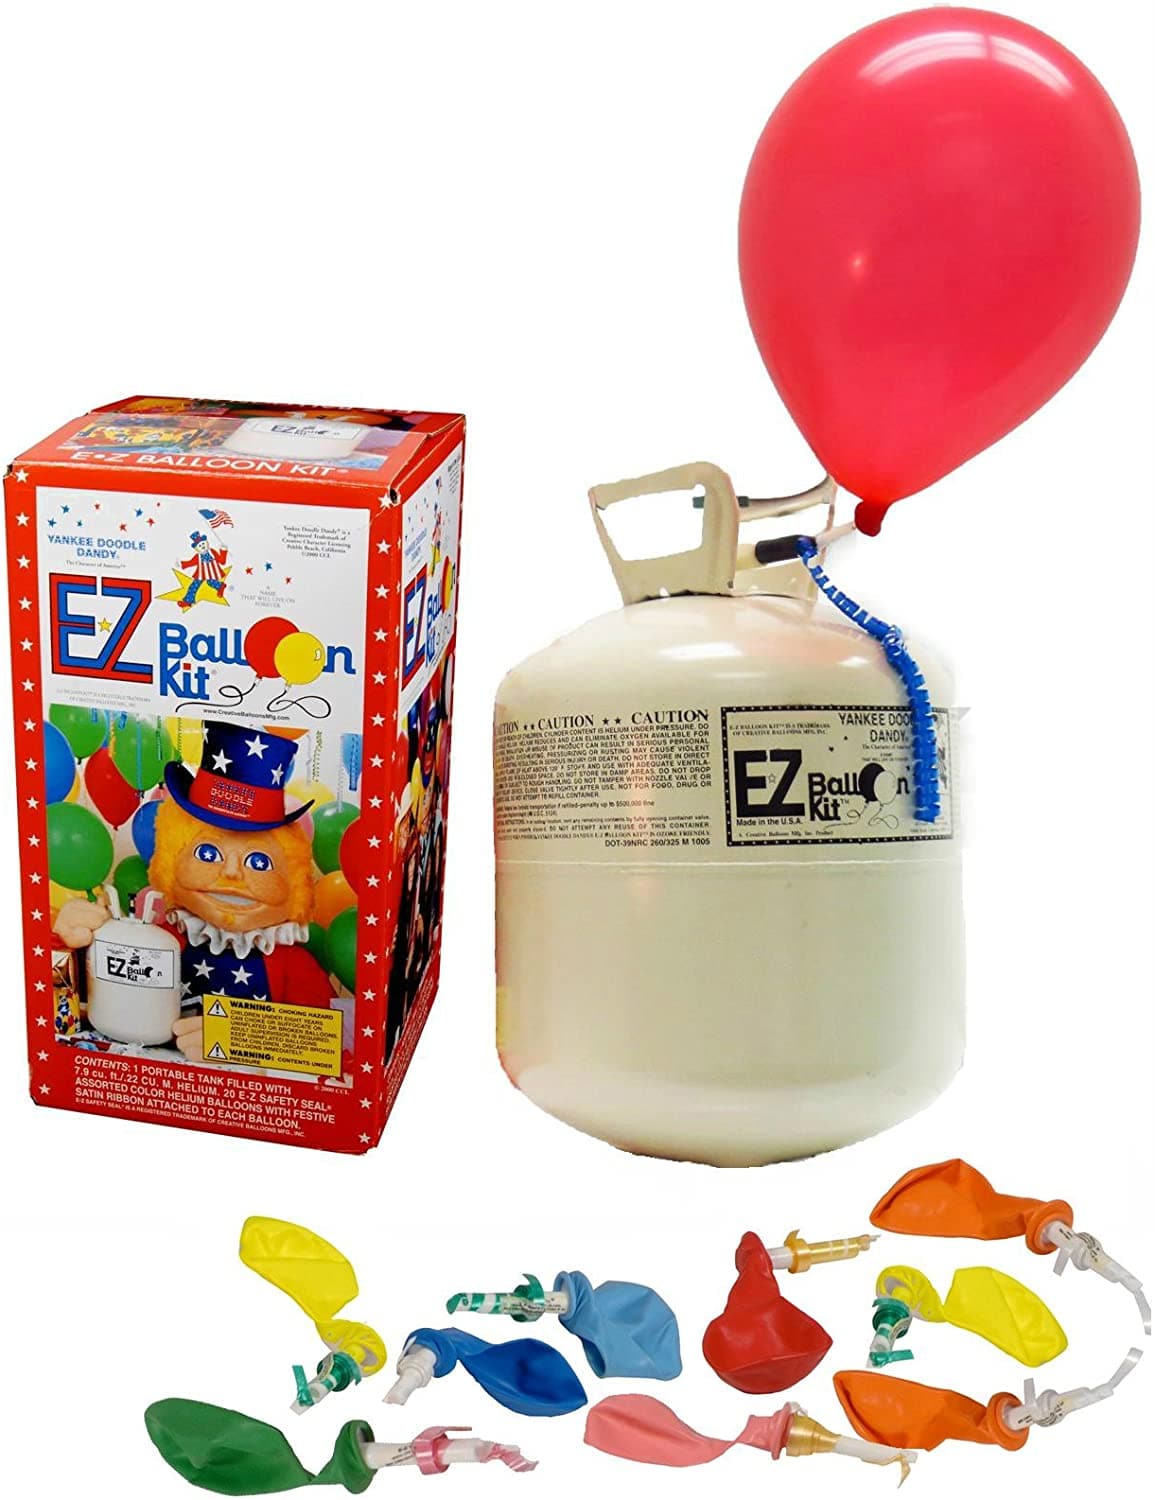 Low Helium Gas Price and All Sizes Helium Gas for Balloons - China